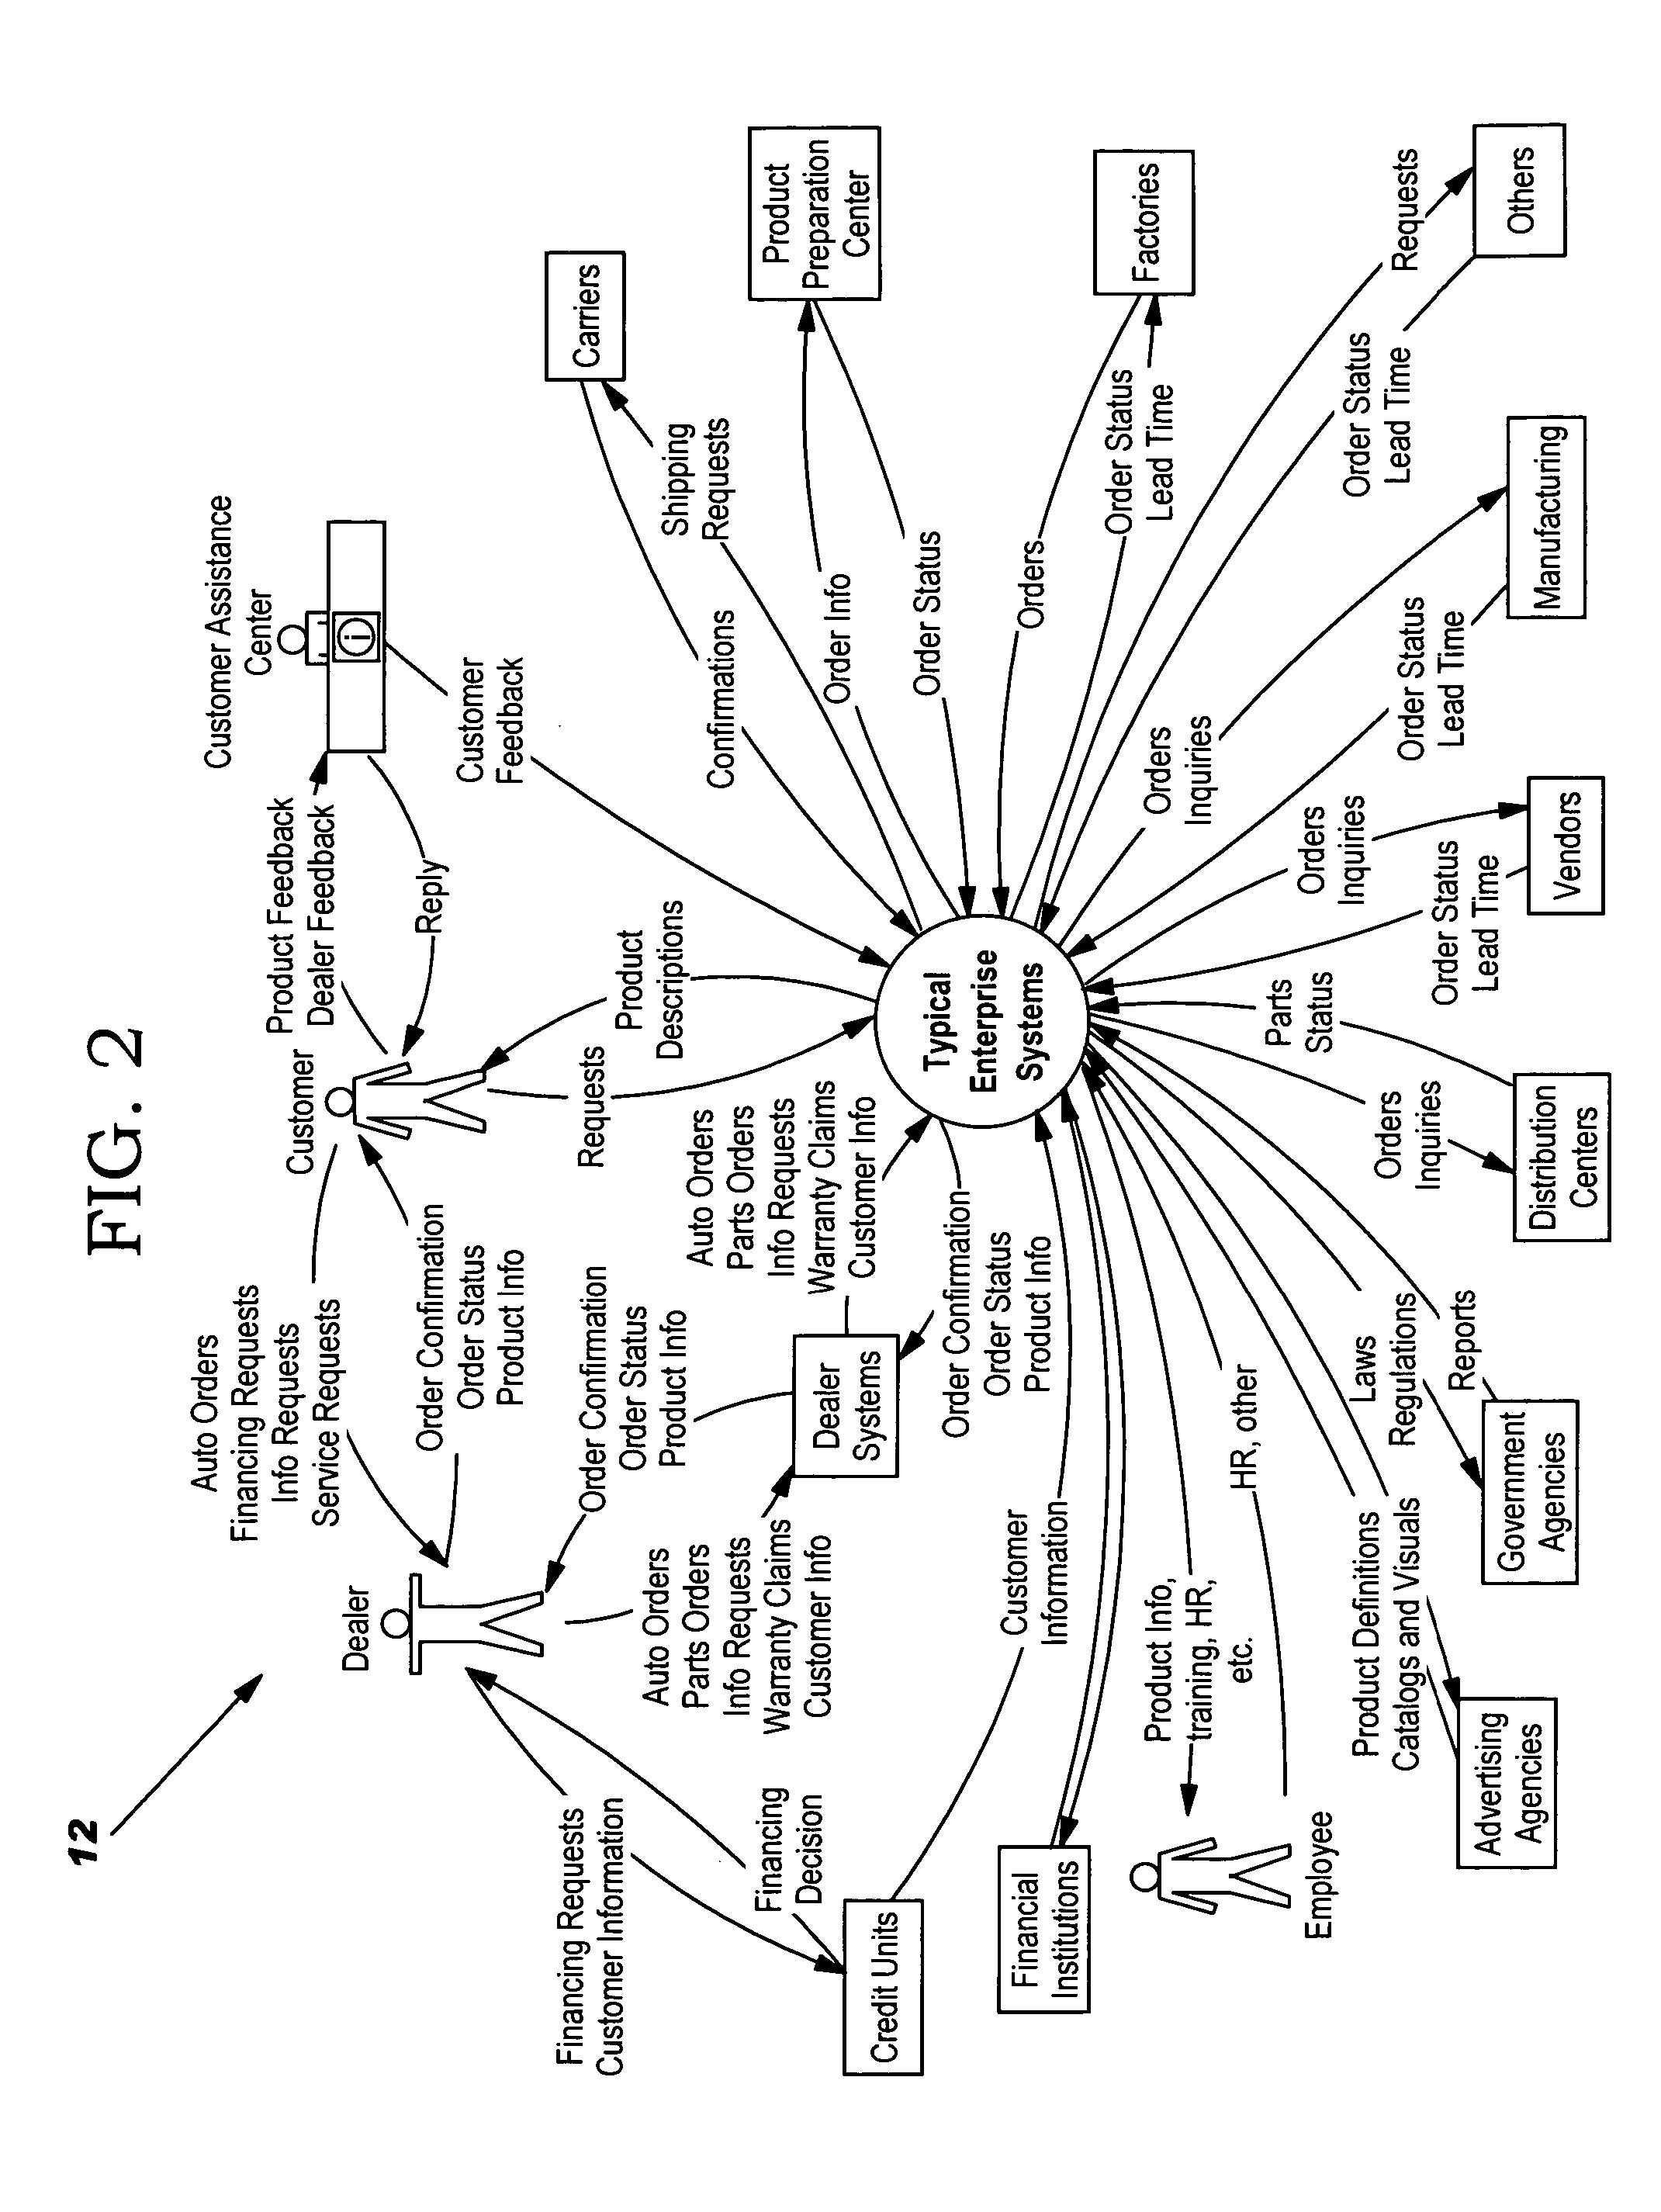 Method, system and program product for assessing an enterprise architecture